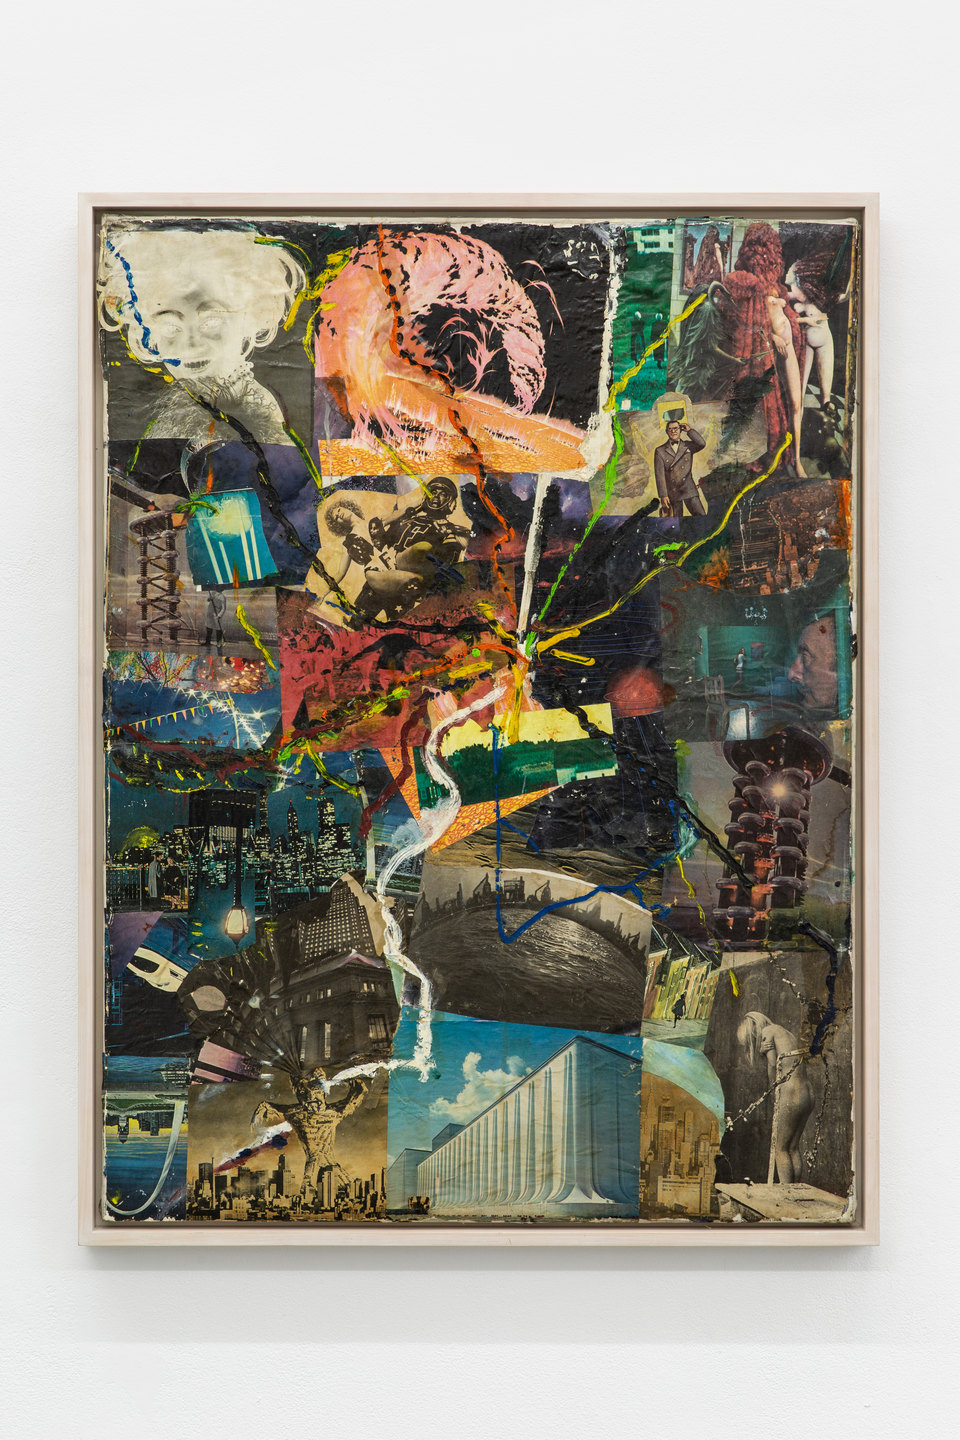 Stanley Fisher, 'Untitled', 1963, Collage: Oil paint and paper on canvas, 101 x 76cm, Shit and Doom - NO!art, 2019, Cell Project Space